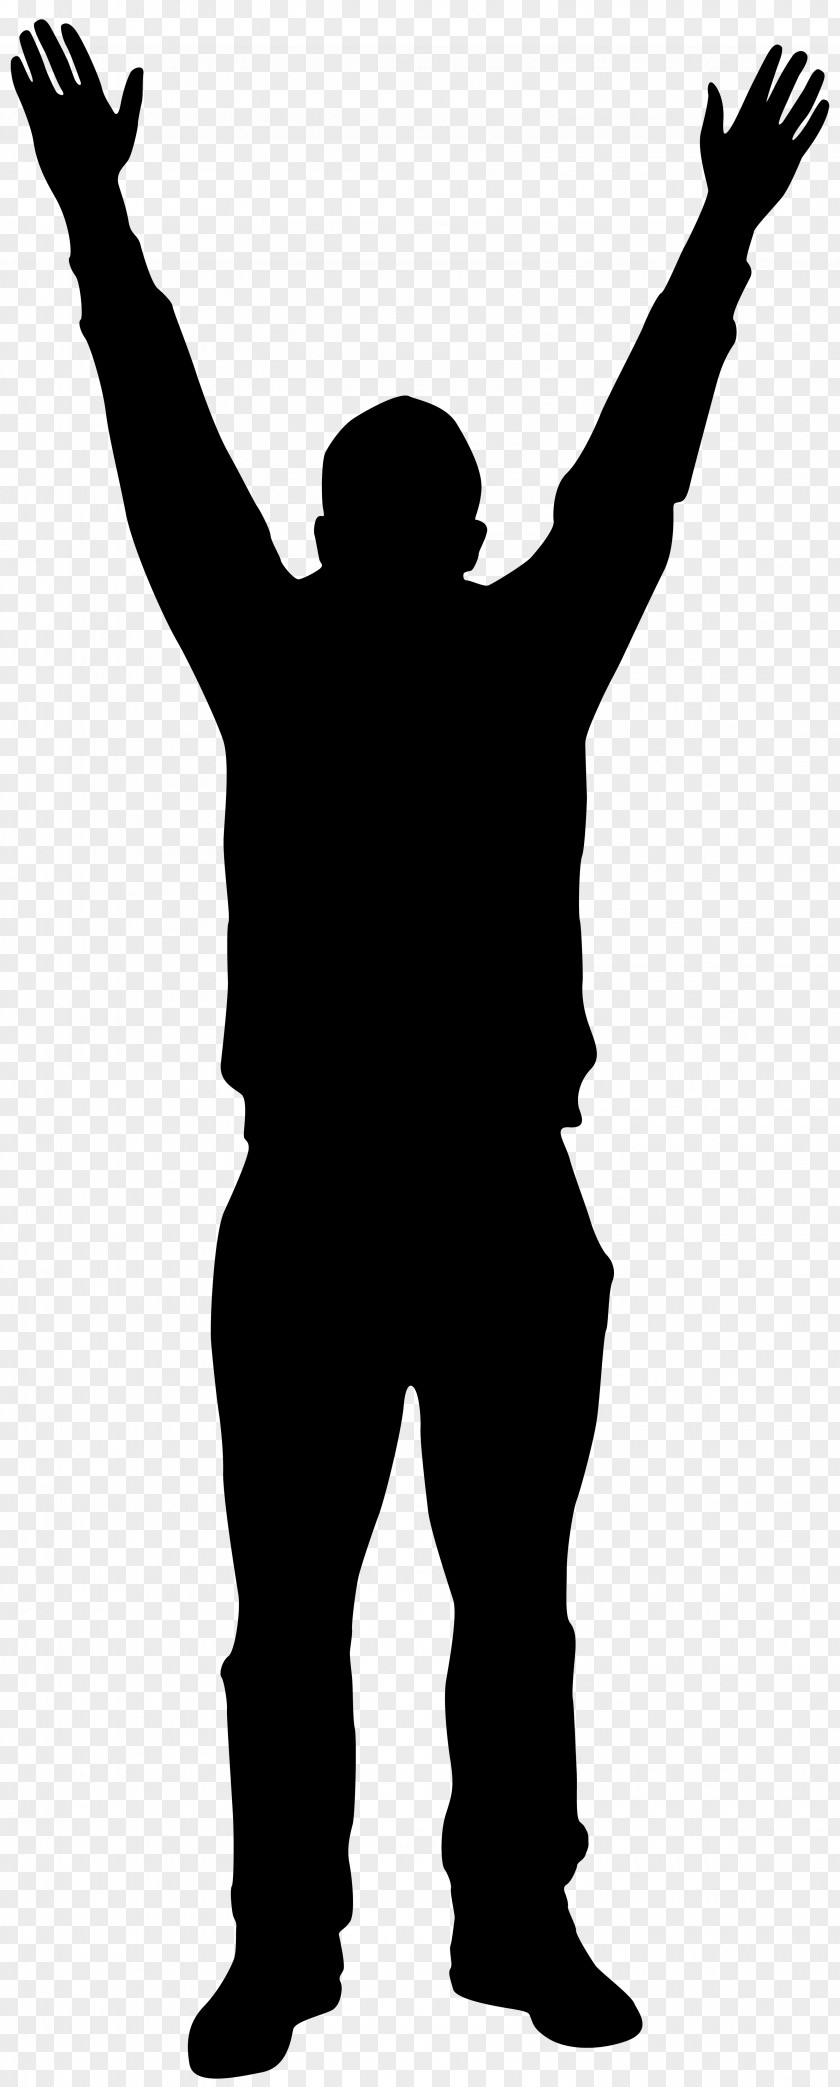 Man With Hands Up Silhouette Clip Art Image PNG